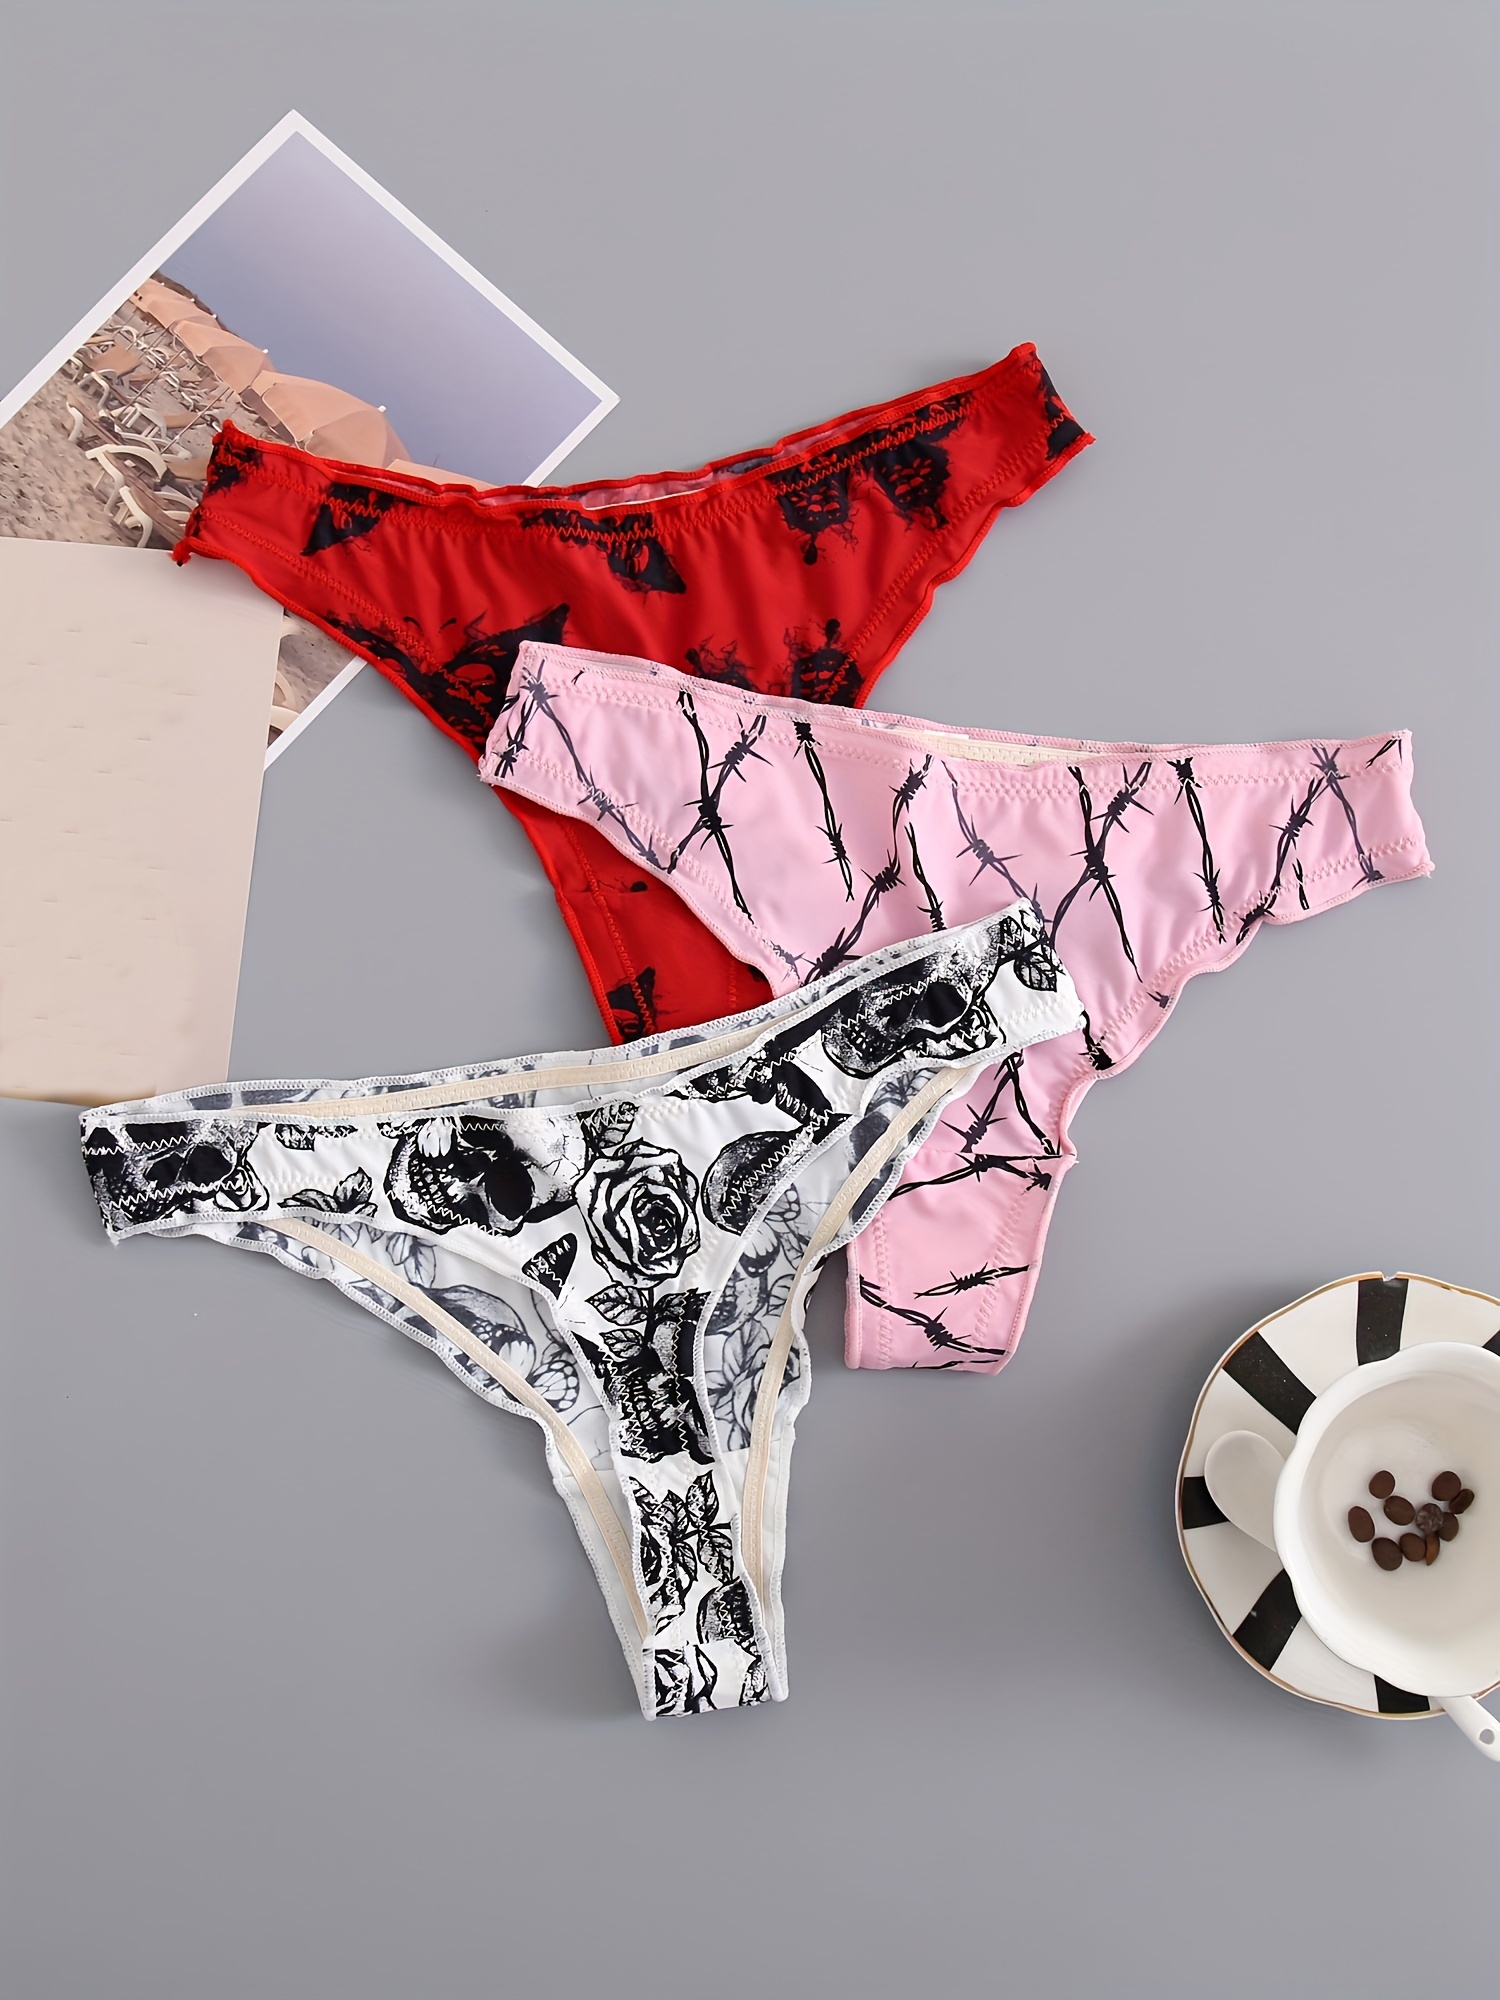 3pcs Floral & Butterfly Thongs, Soft & Comfy Stretchy Intimates Panties,  Women's Lingerie & Underwear